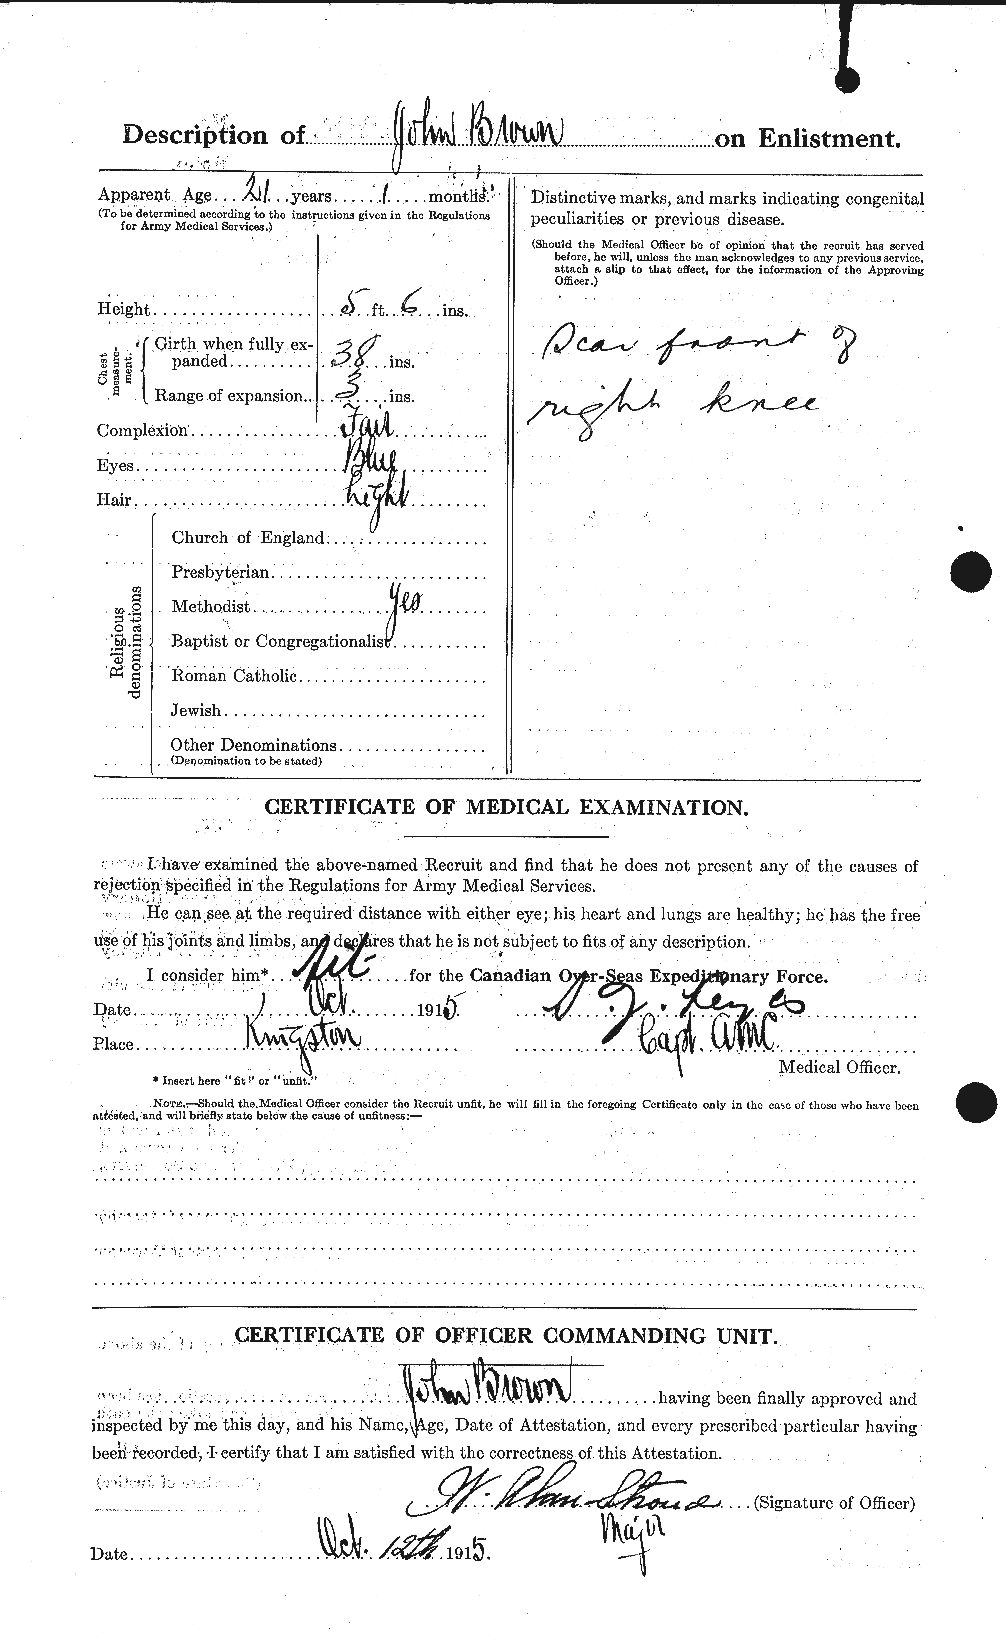 Personnel Records of the First World War - CEF 263918b